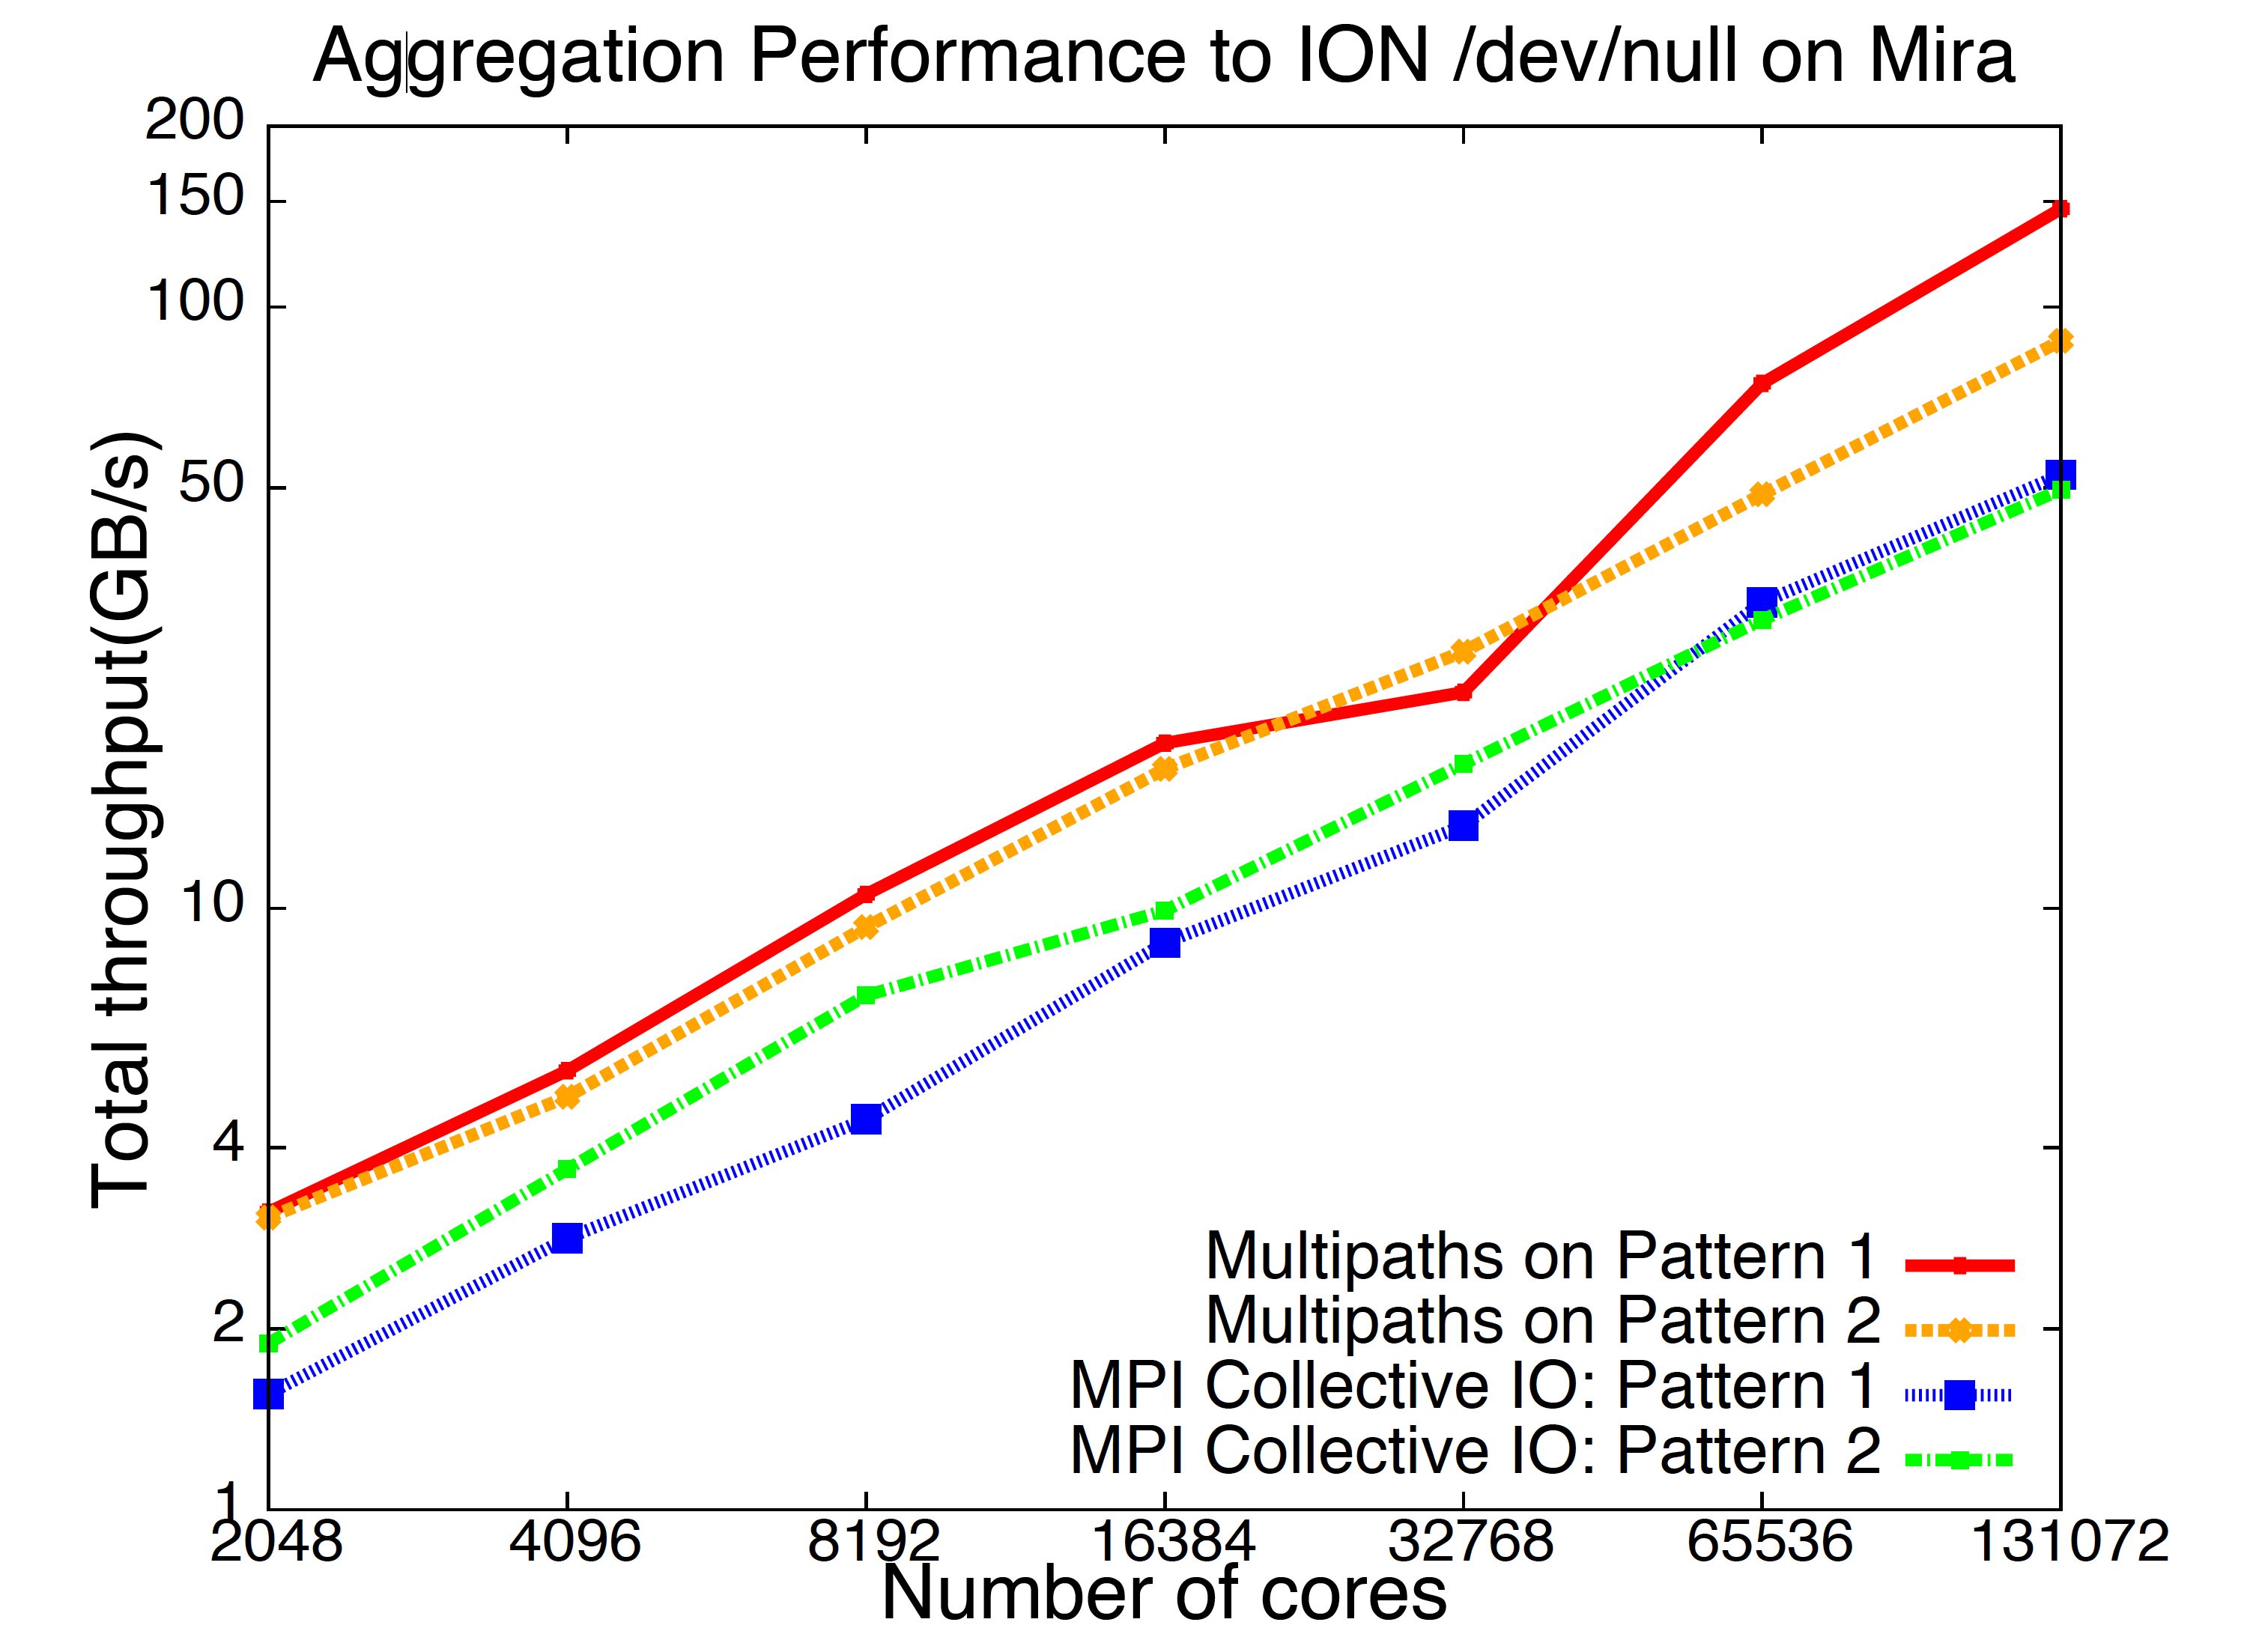 Efficacy of the approaches to move the data to /dev/null on the I/O nodes.